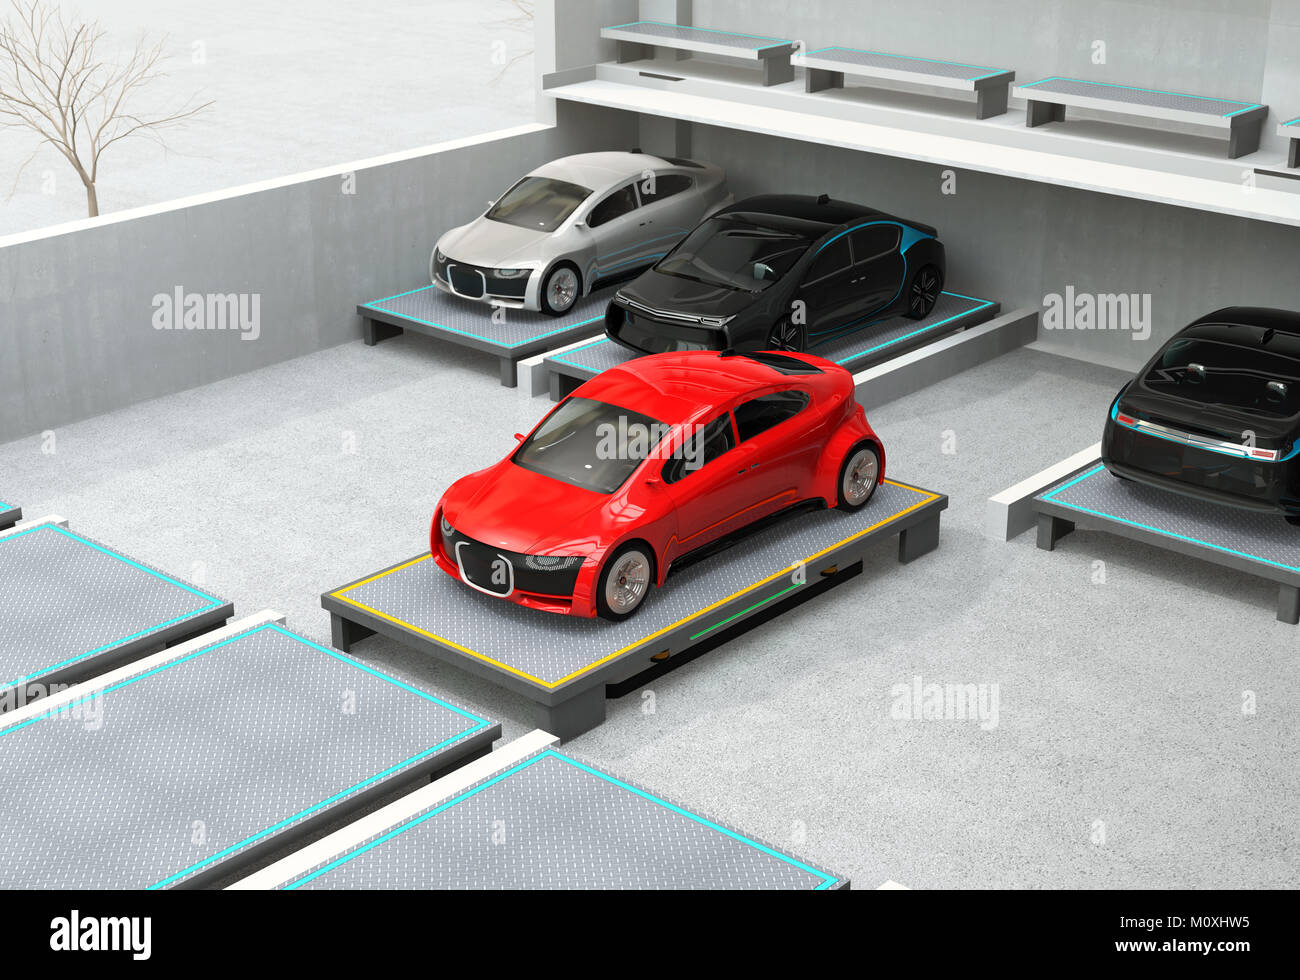 An automated guided vehicle (AGV) carrying a red car to parking space. Concept for automatic car parking system. 3D rendering image. Stock Photo